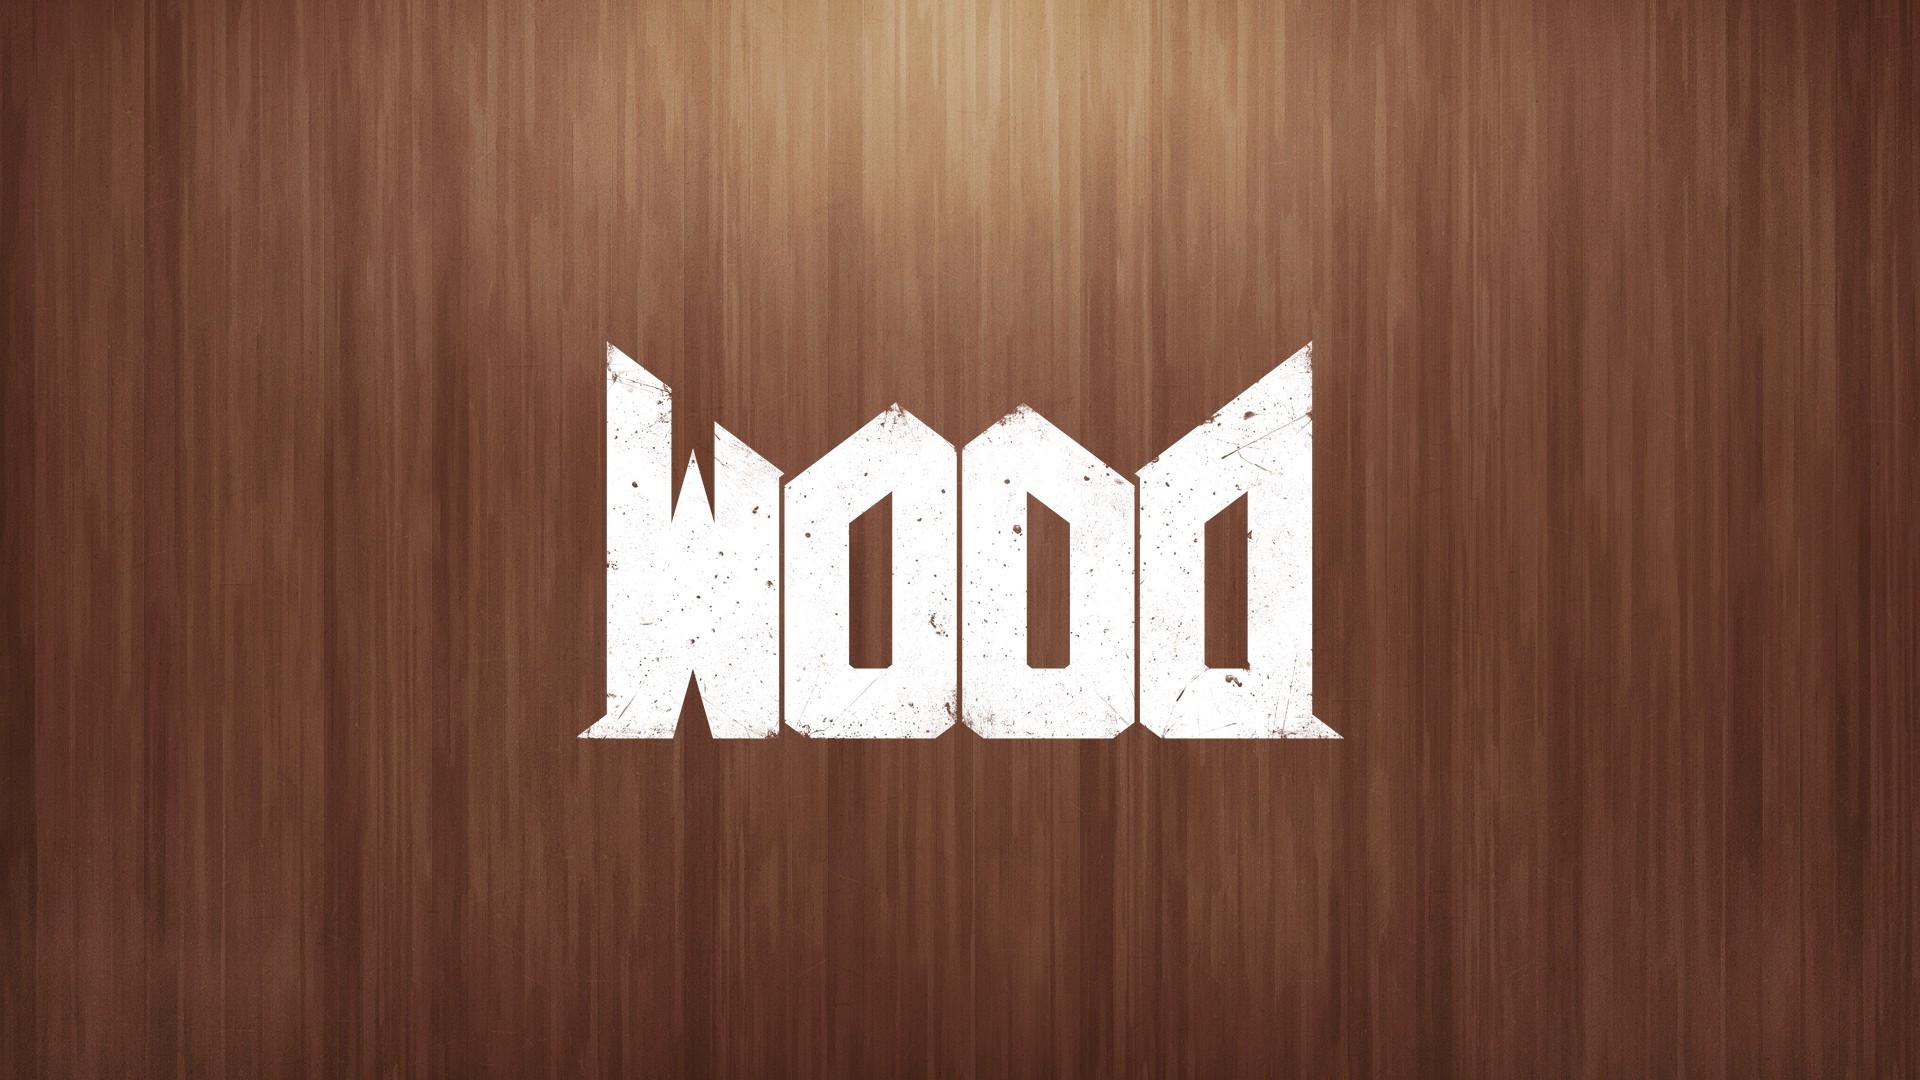 General wood Doom (game) video games humor upside down letter  text wooden surface